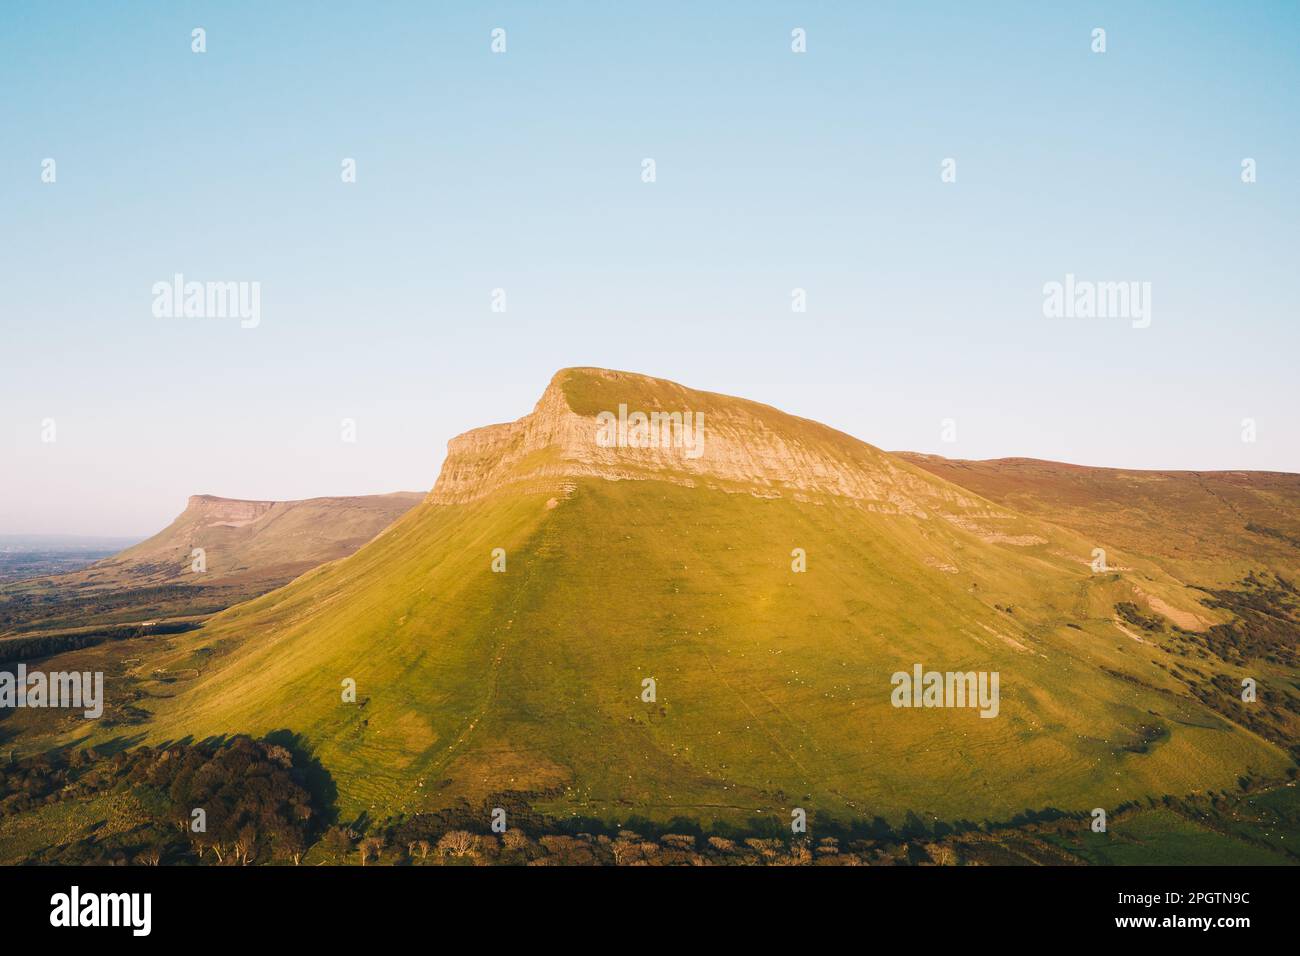 County Sligo / Ireland : Aerial view of Benbulbin or Benbulben a large flat-topped rock formation, part of Dartry Mountains Stock Photo